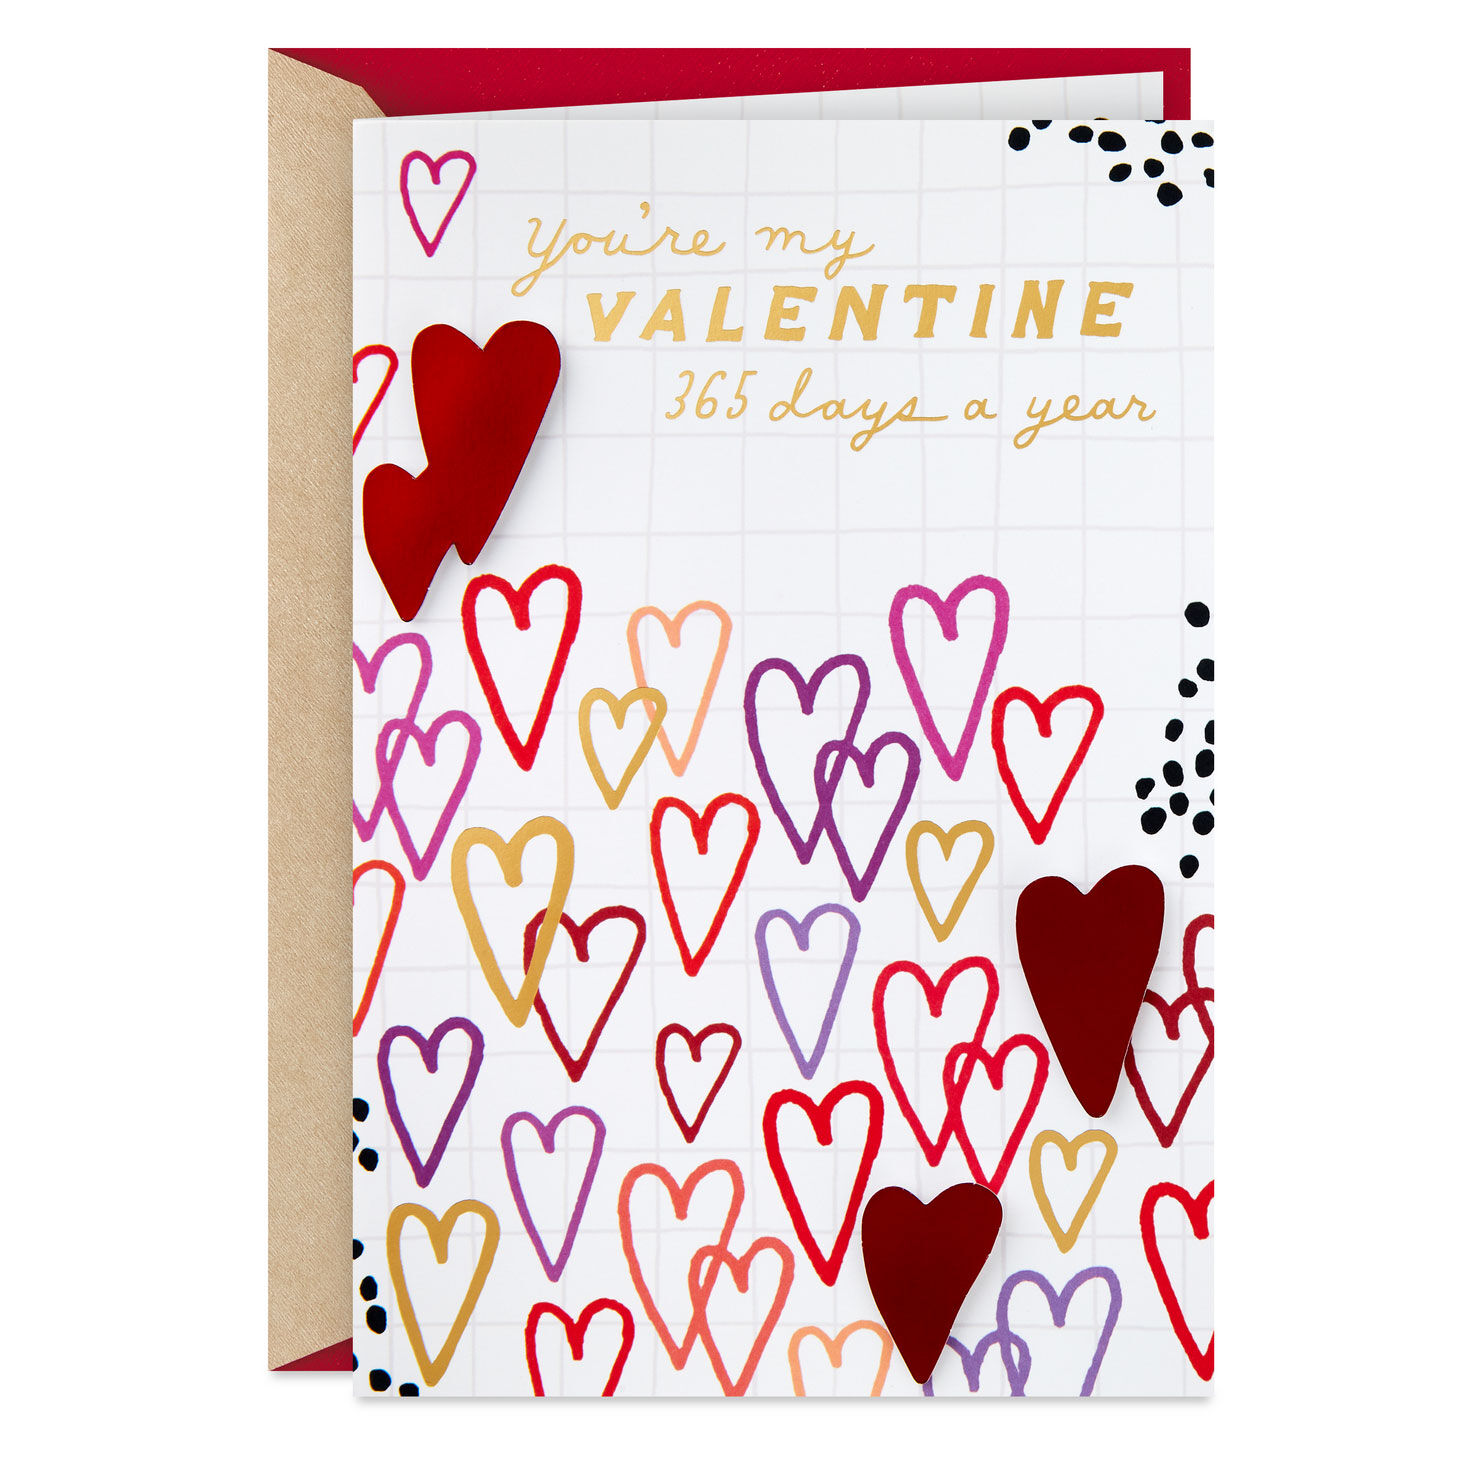 You're My Valentine 365 Days a Year Romantic Valentine's Day Card for only USD 6.59 | Hallmark